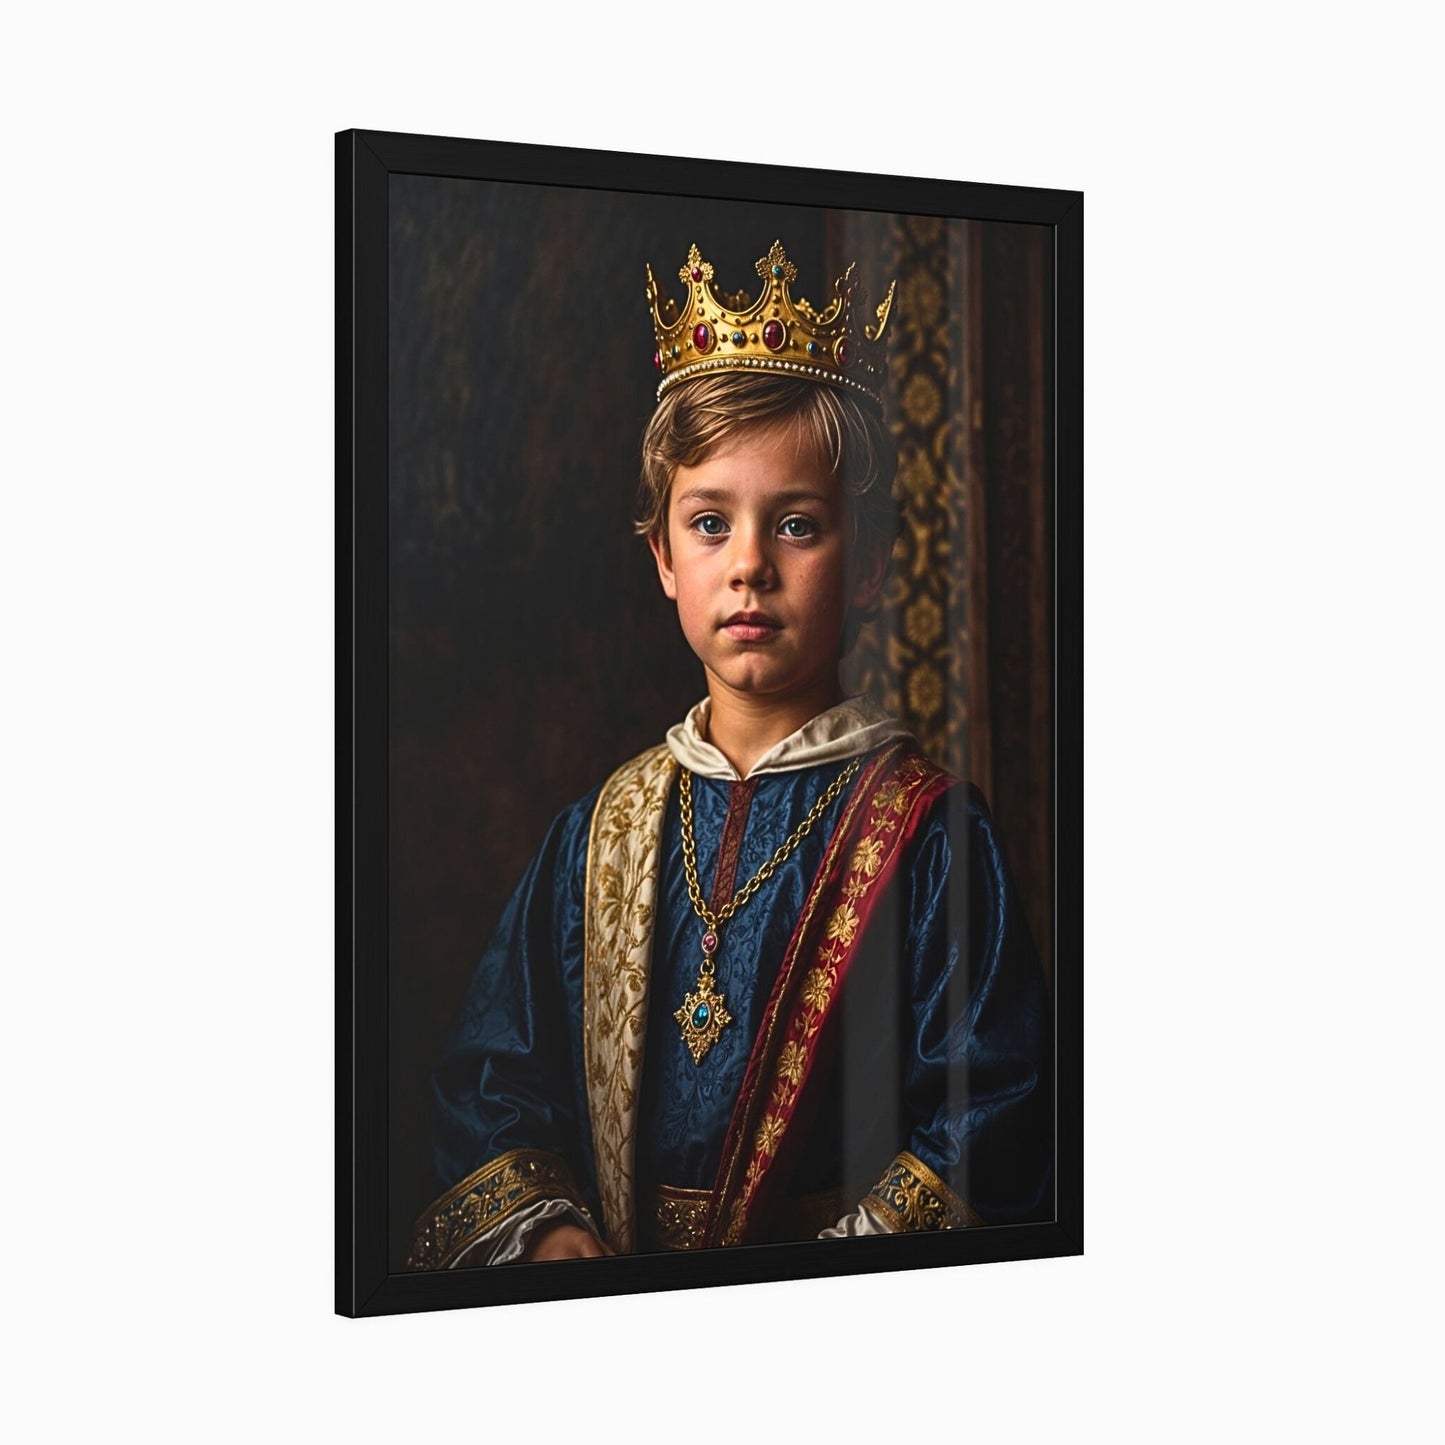 Kids Royal Custom Portrait: Personalized Little King Portrait from Photo, Perfect Birthday Gift for Boys. A20.1